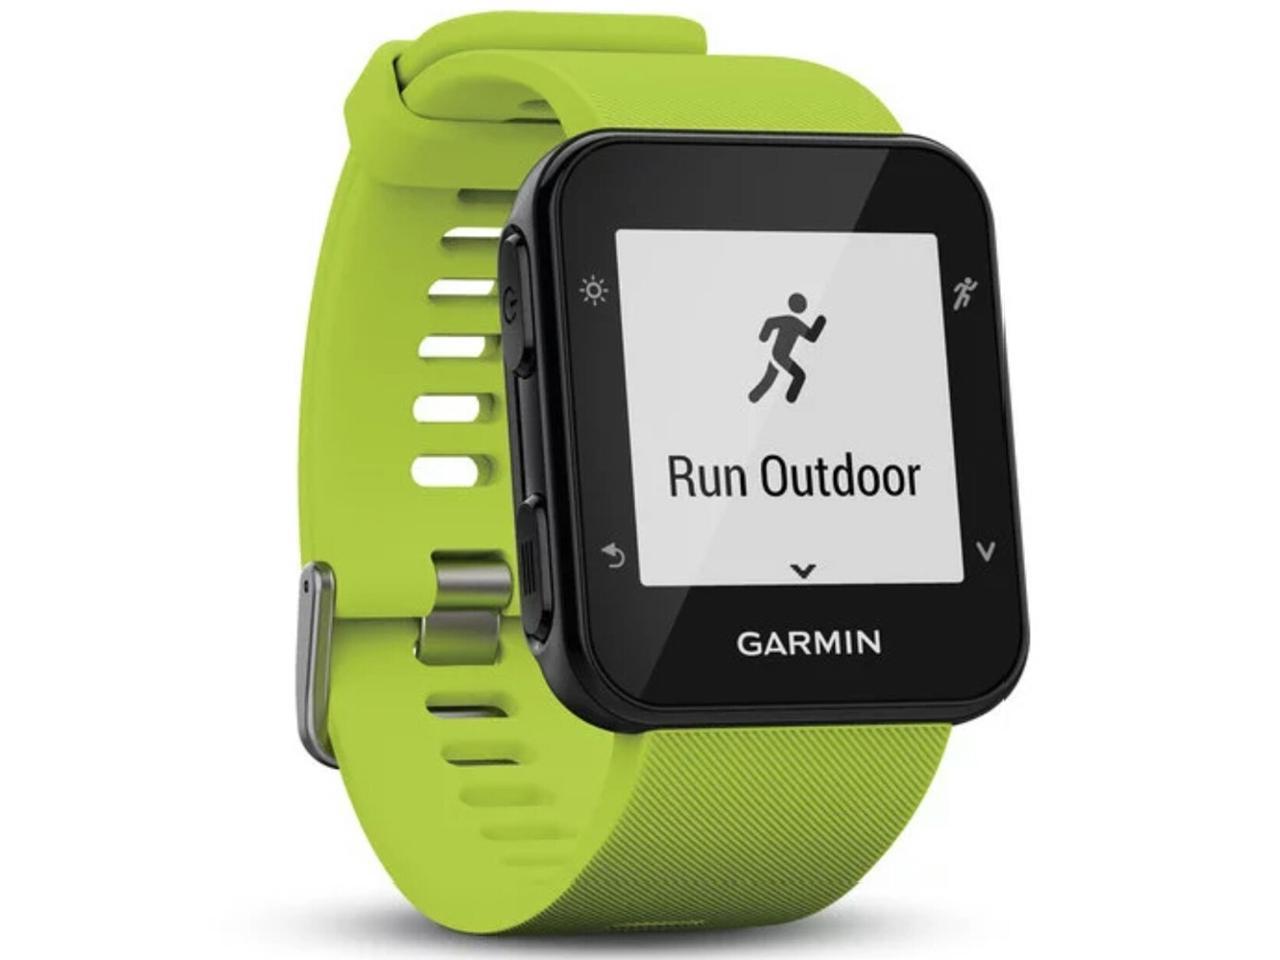 Garmin Forerunner 35 Fitness GPS Running Watch with HRM Limelight Edition Model 010-01689-11